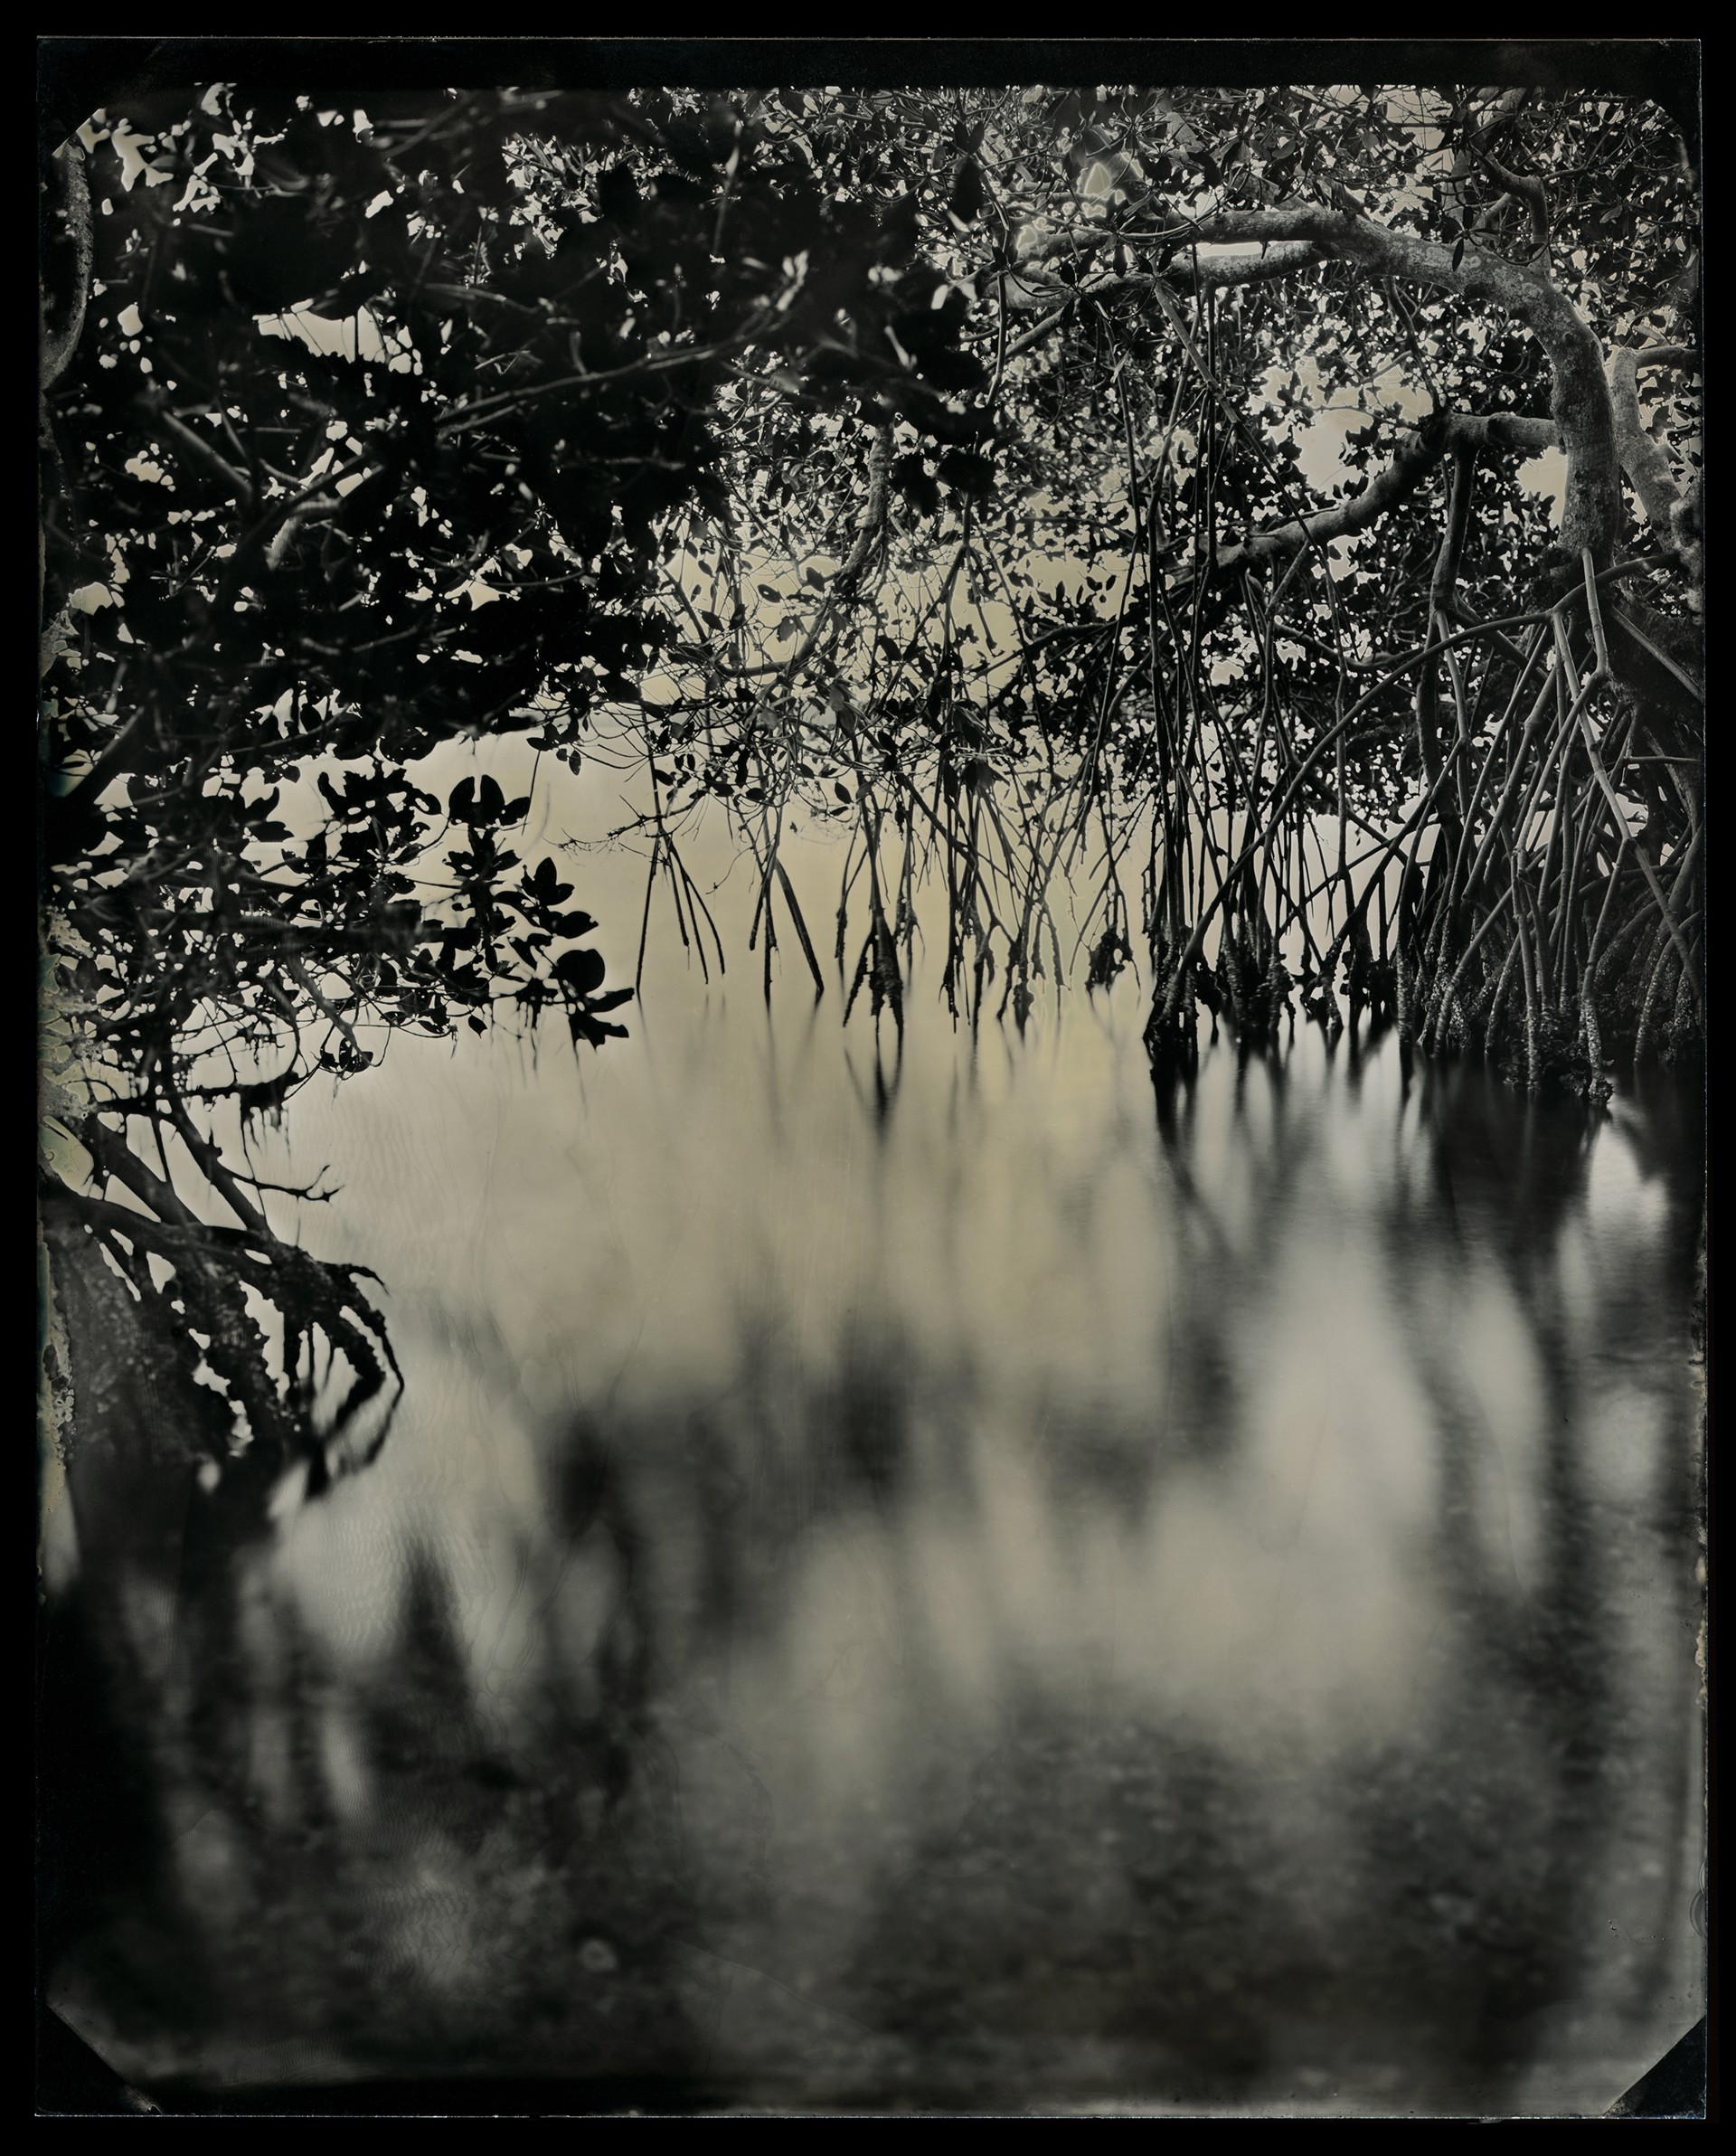 Sandy’s Trail, Cabbage Key, Florida by Montalvo & McCullers